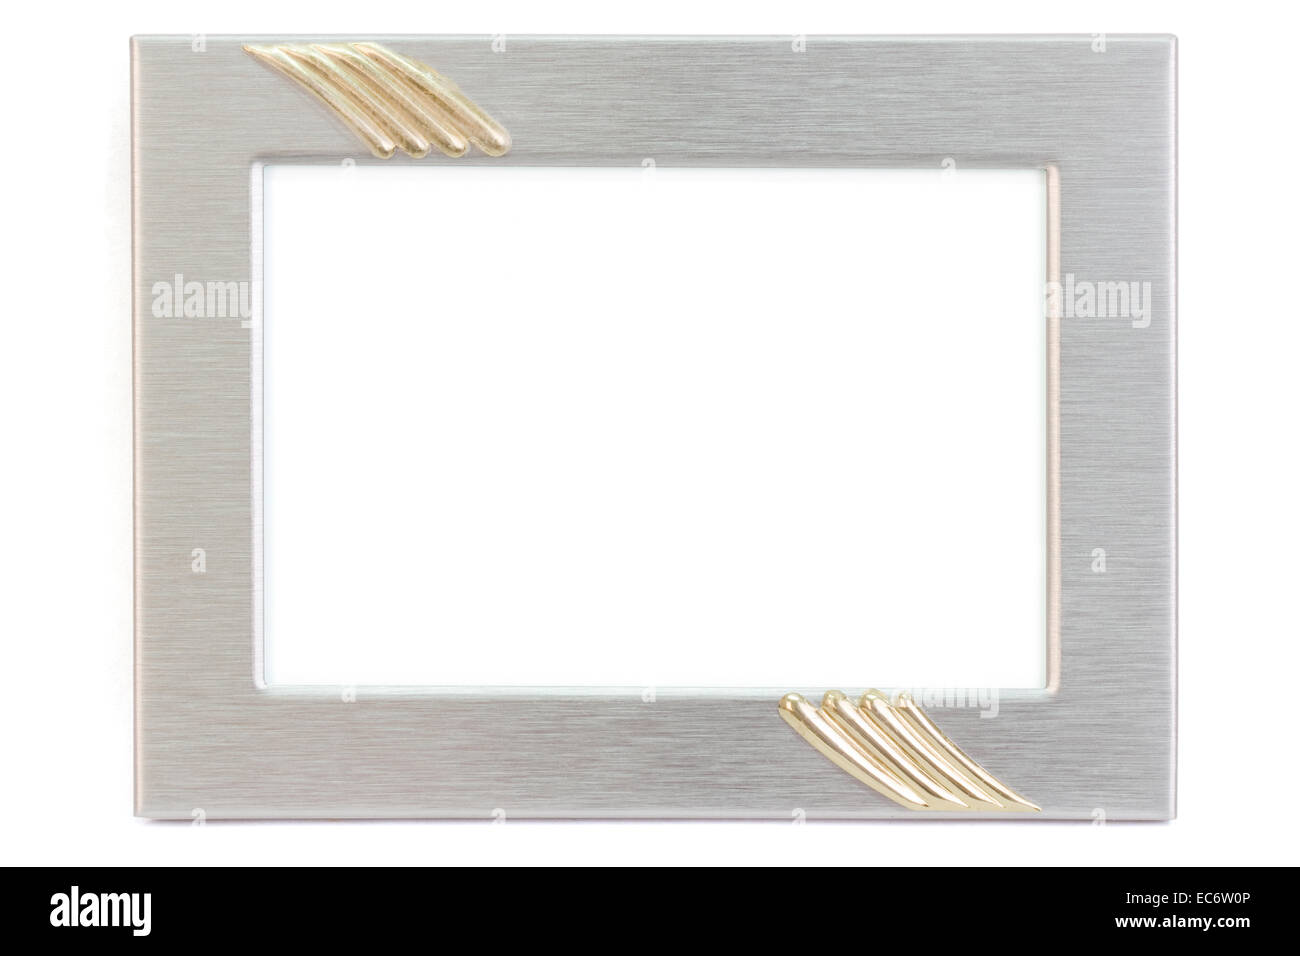 Silver picture frame in portrait format Stock Photo